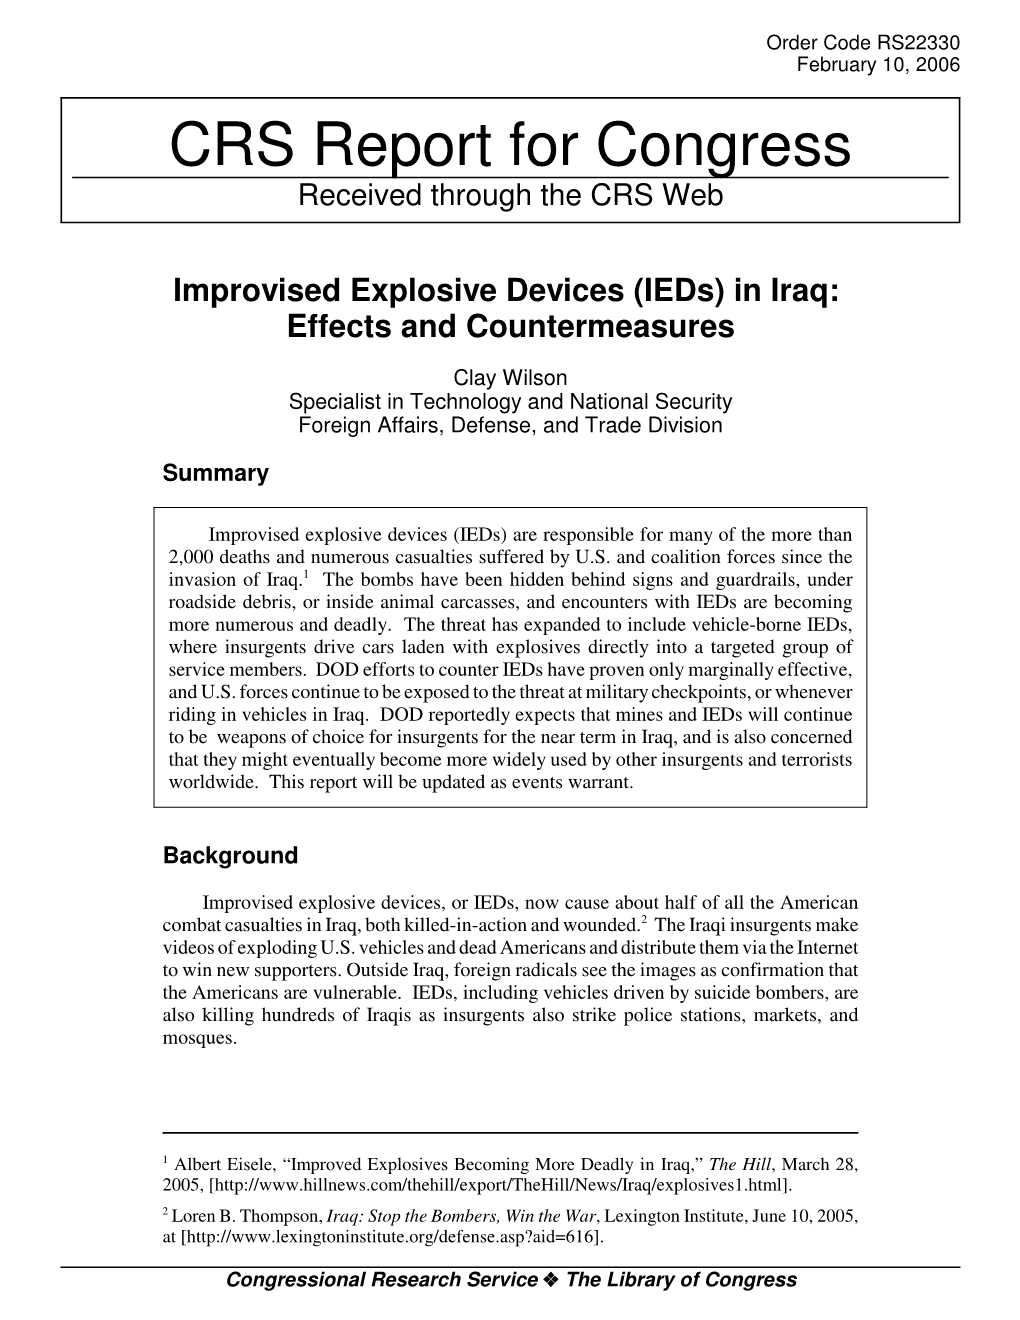 Improvised Explosive Devices (Ieds) in Iraq: Effects and Countermeasures